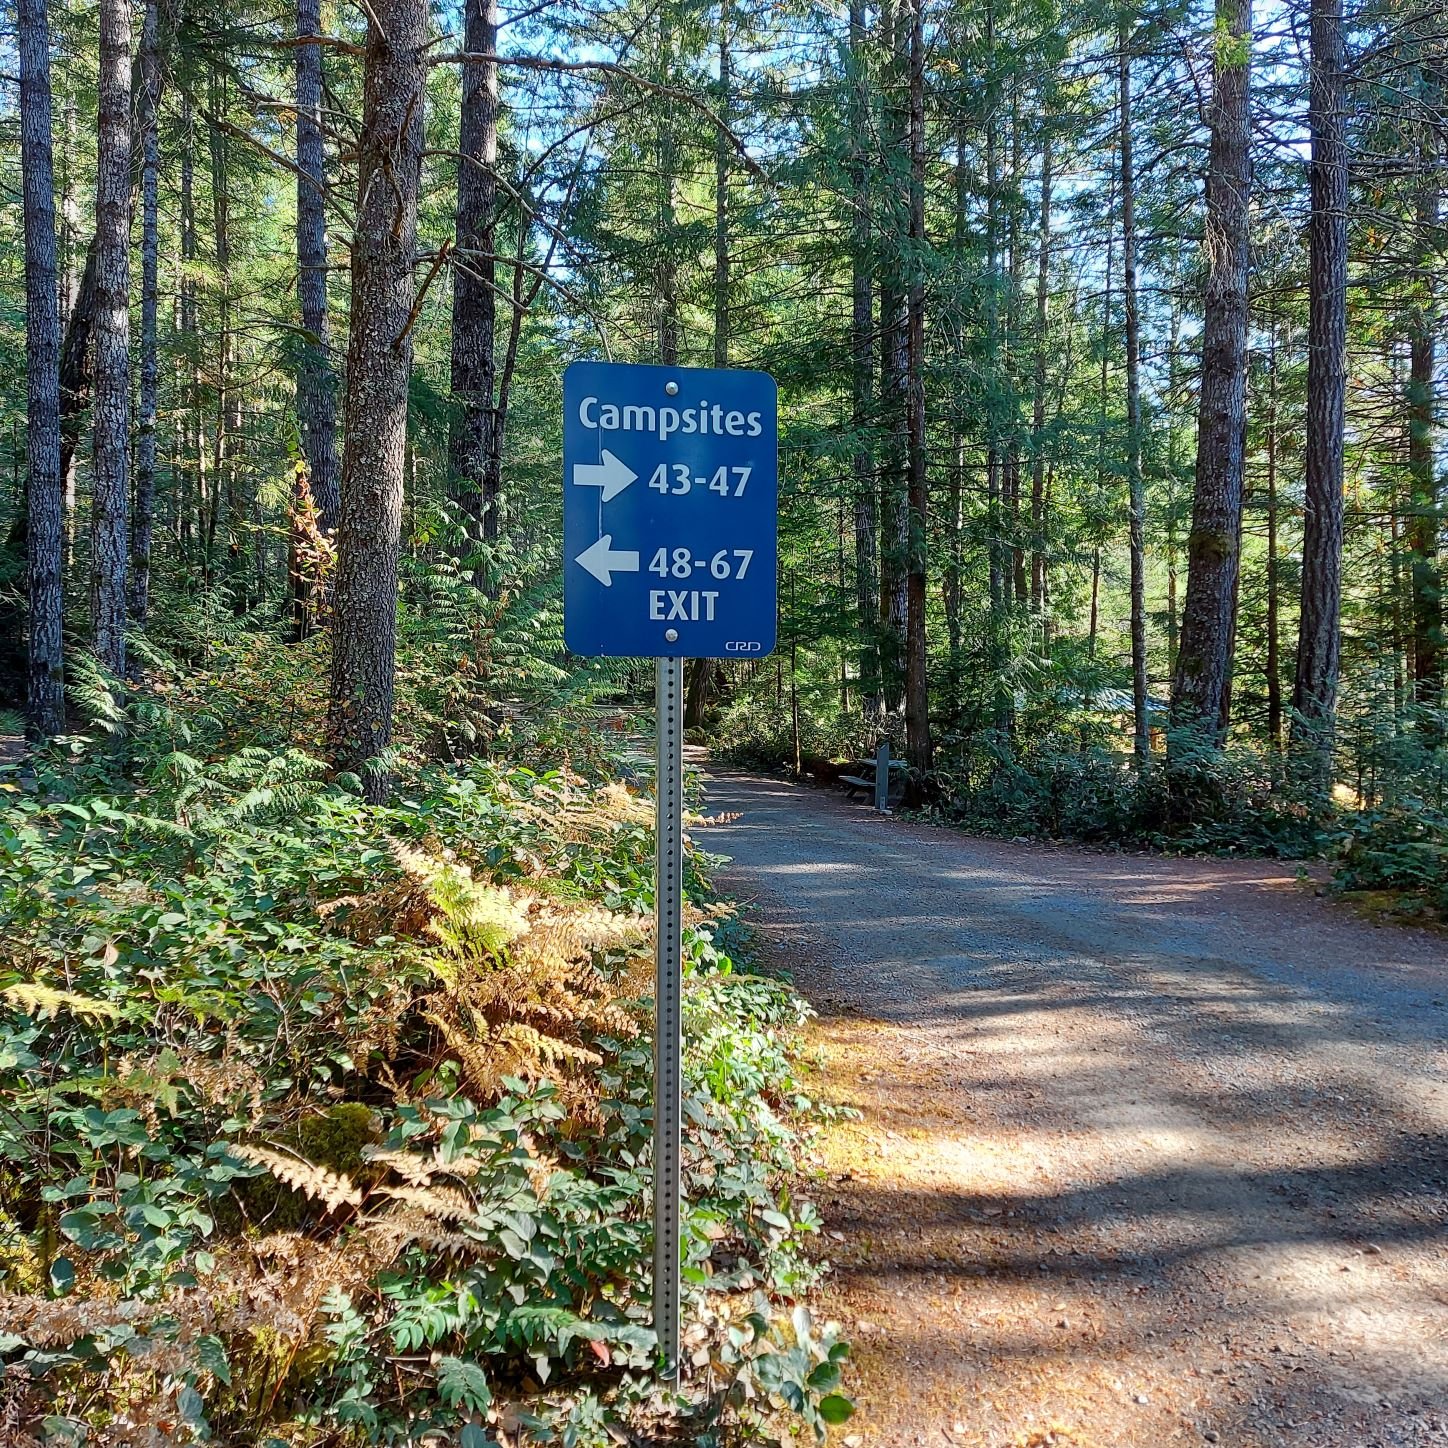 2022 STARR Predict your time 8.6k campground, follow exit 1 rs.jpg